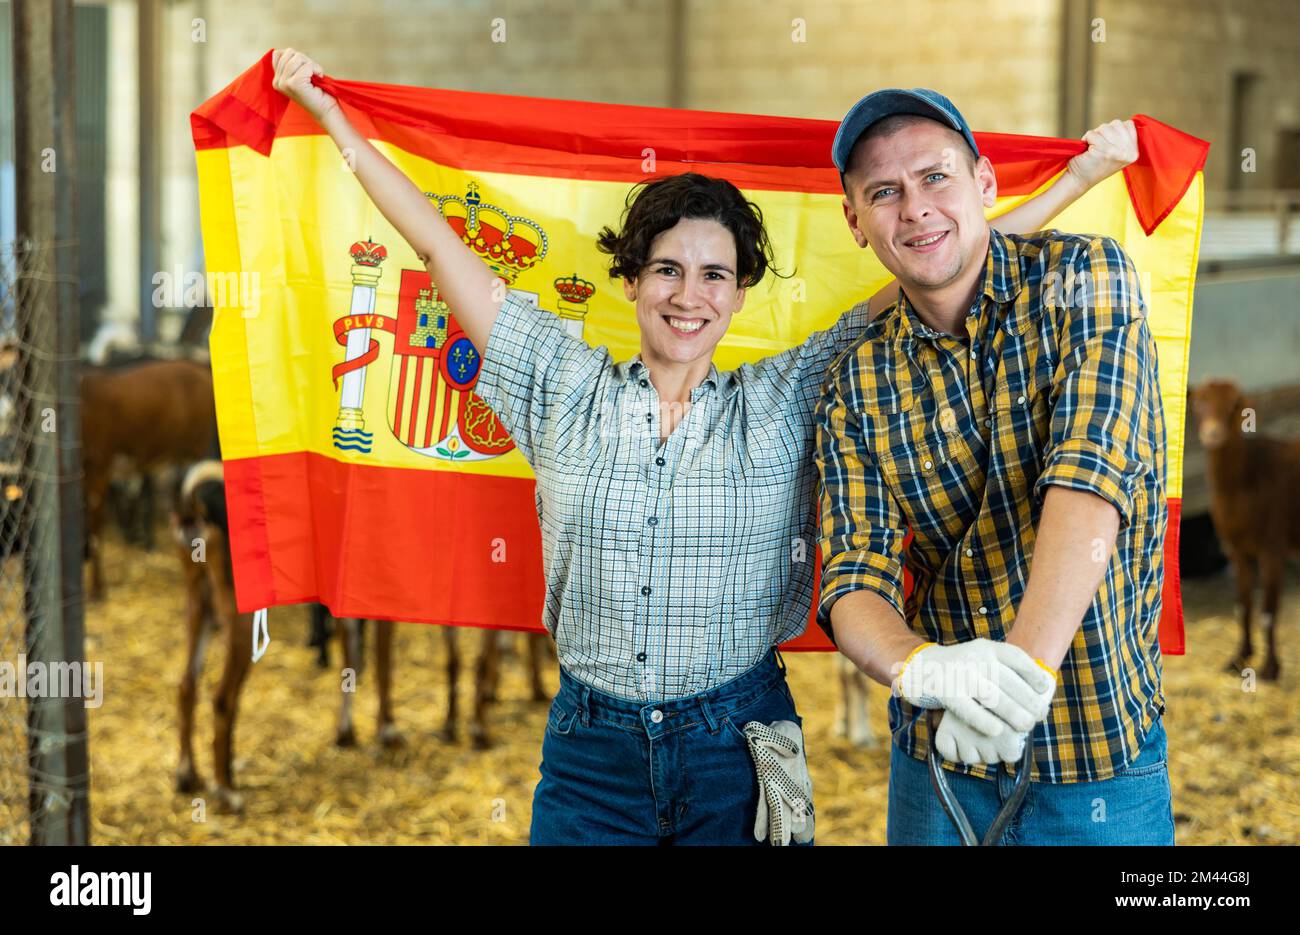 Happy man and woman farmer coworkers waving flag of Spain on goat farm Stock Photo